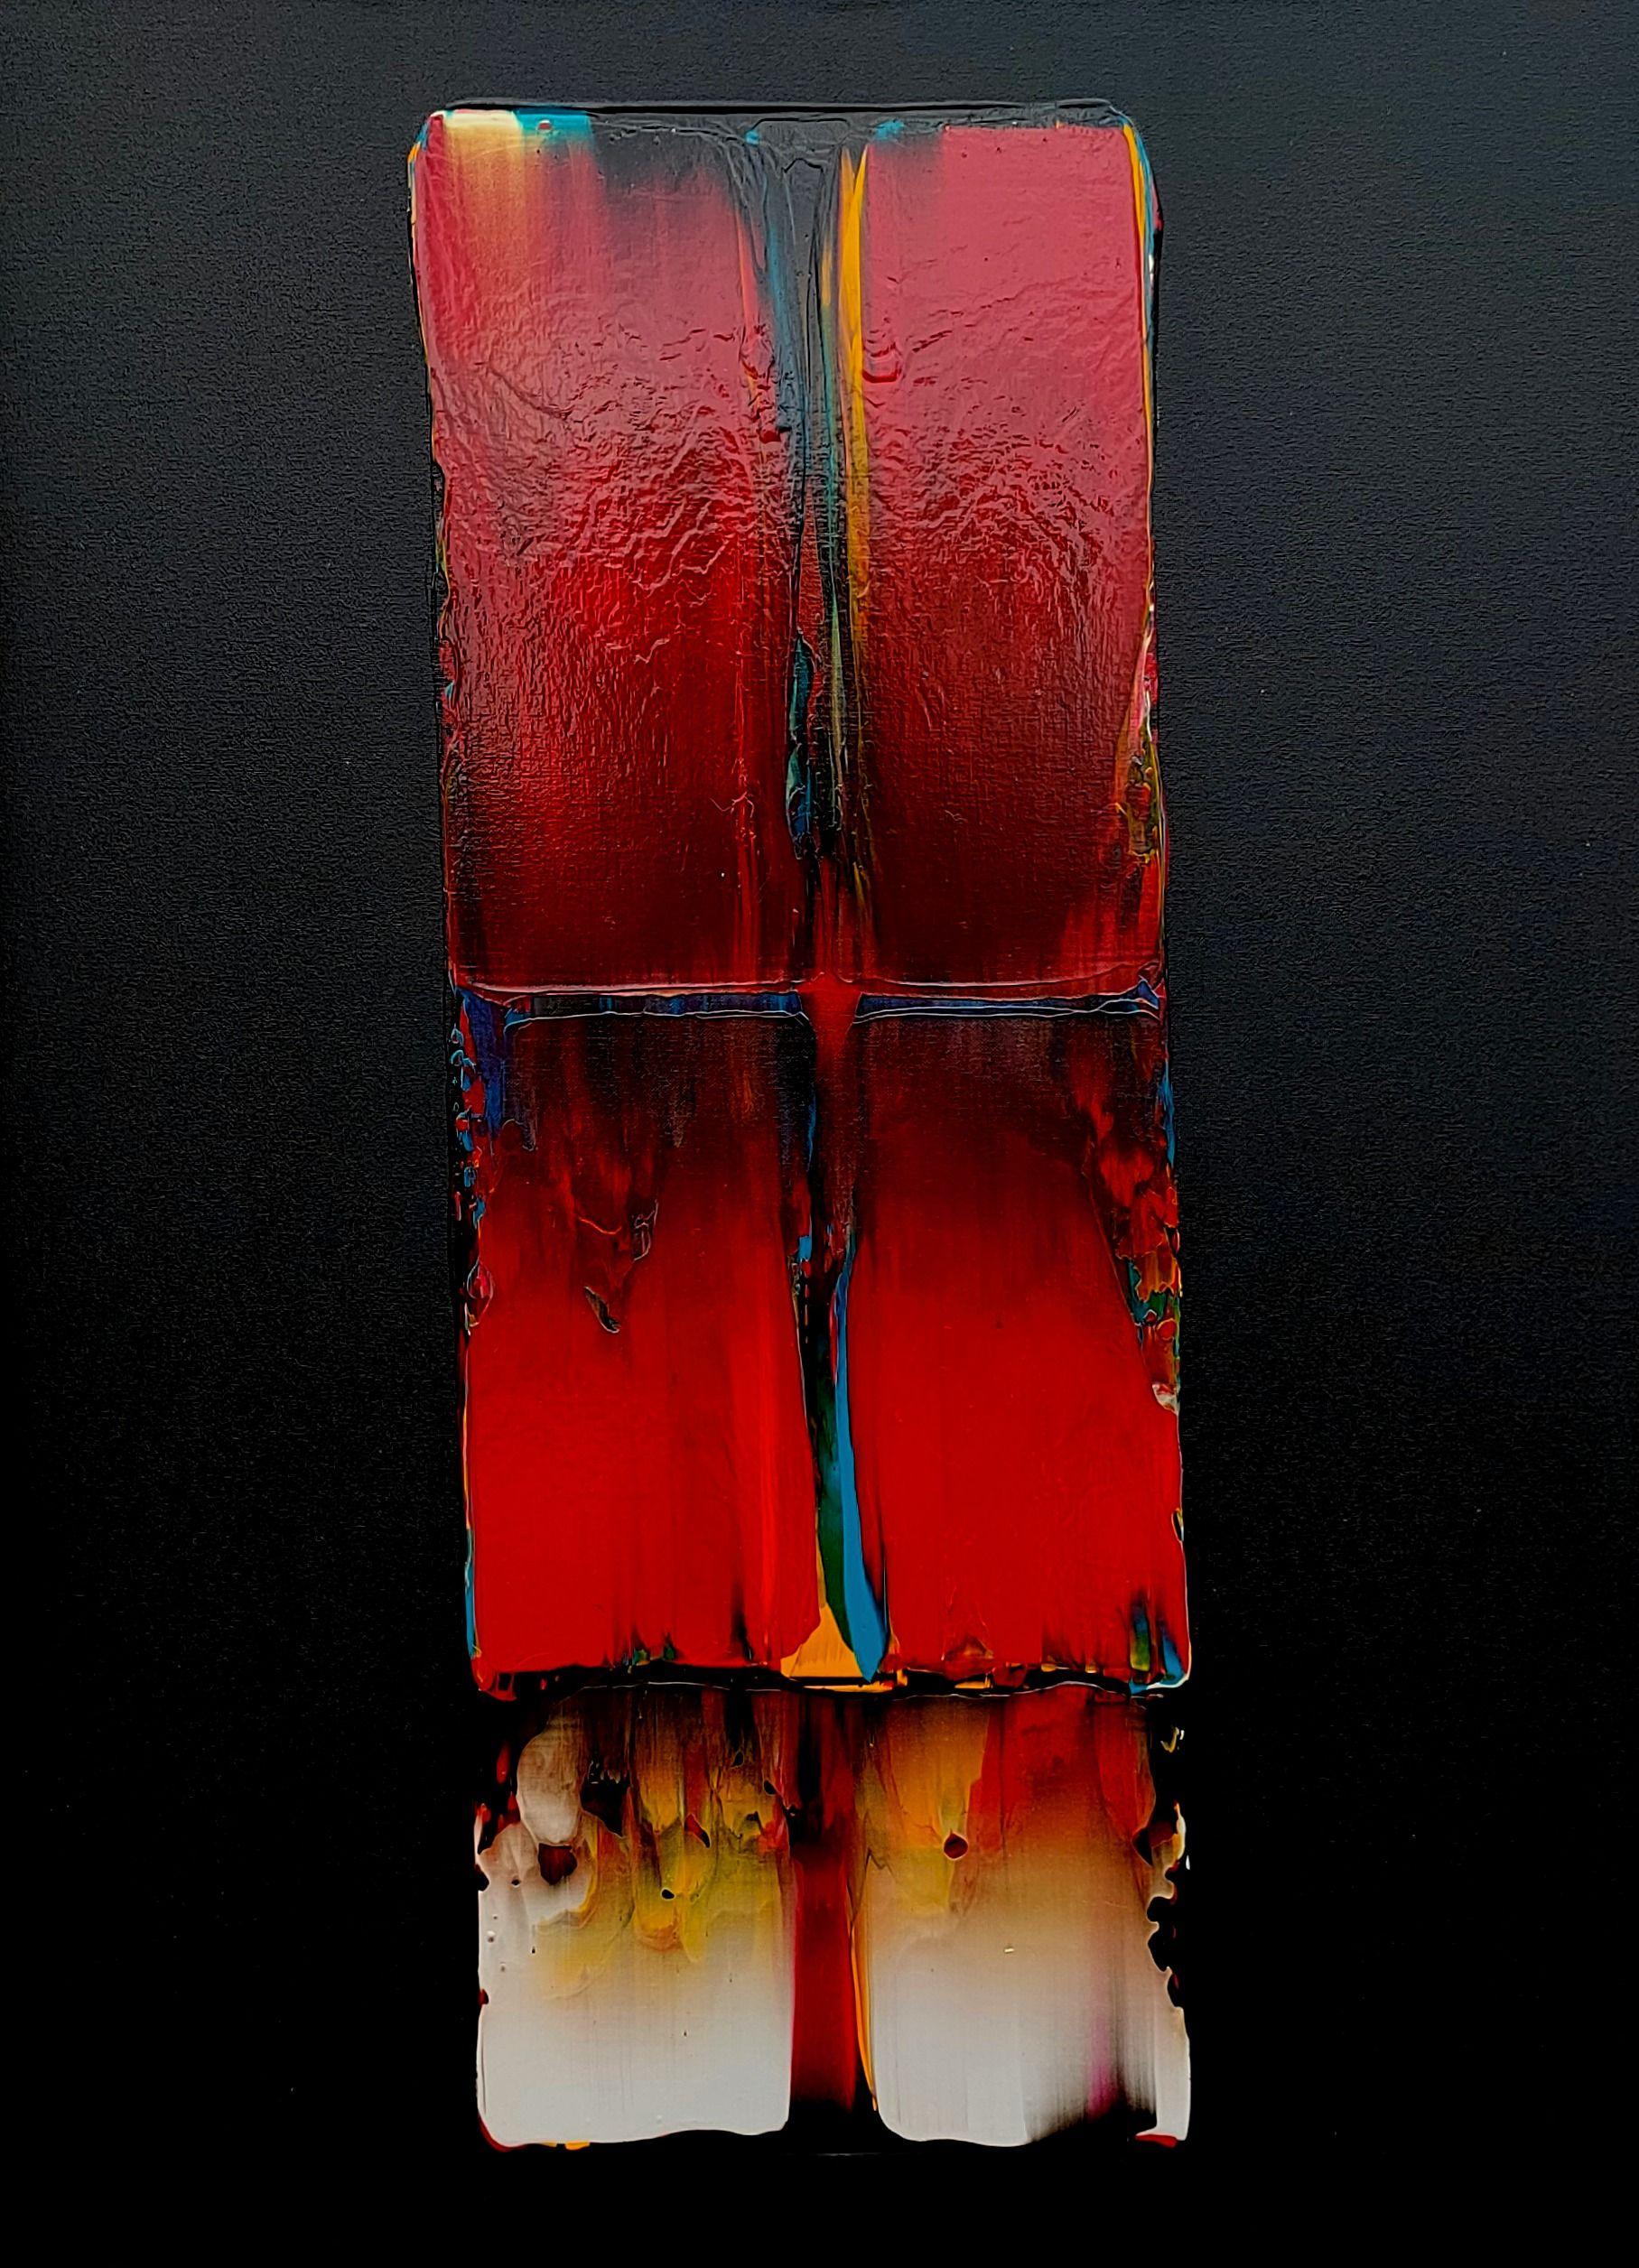 paulo ferreira Abstract Painting - Exultation 3, Painting, Acrylic on Canvas